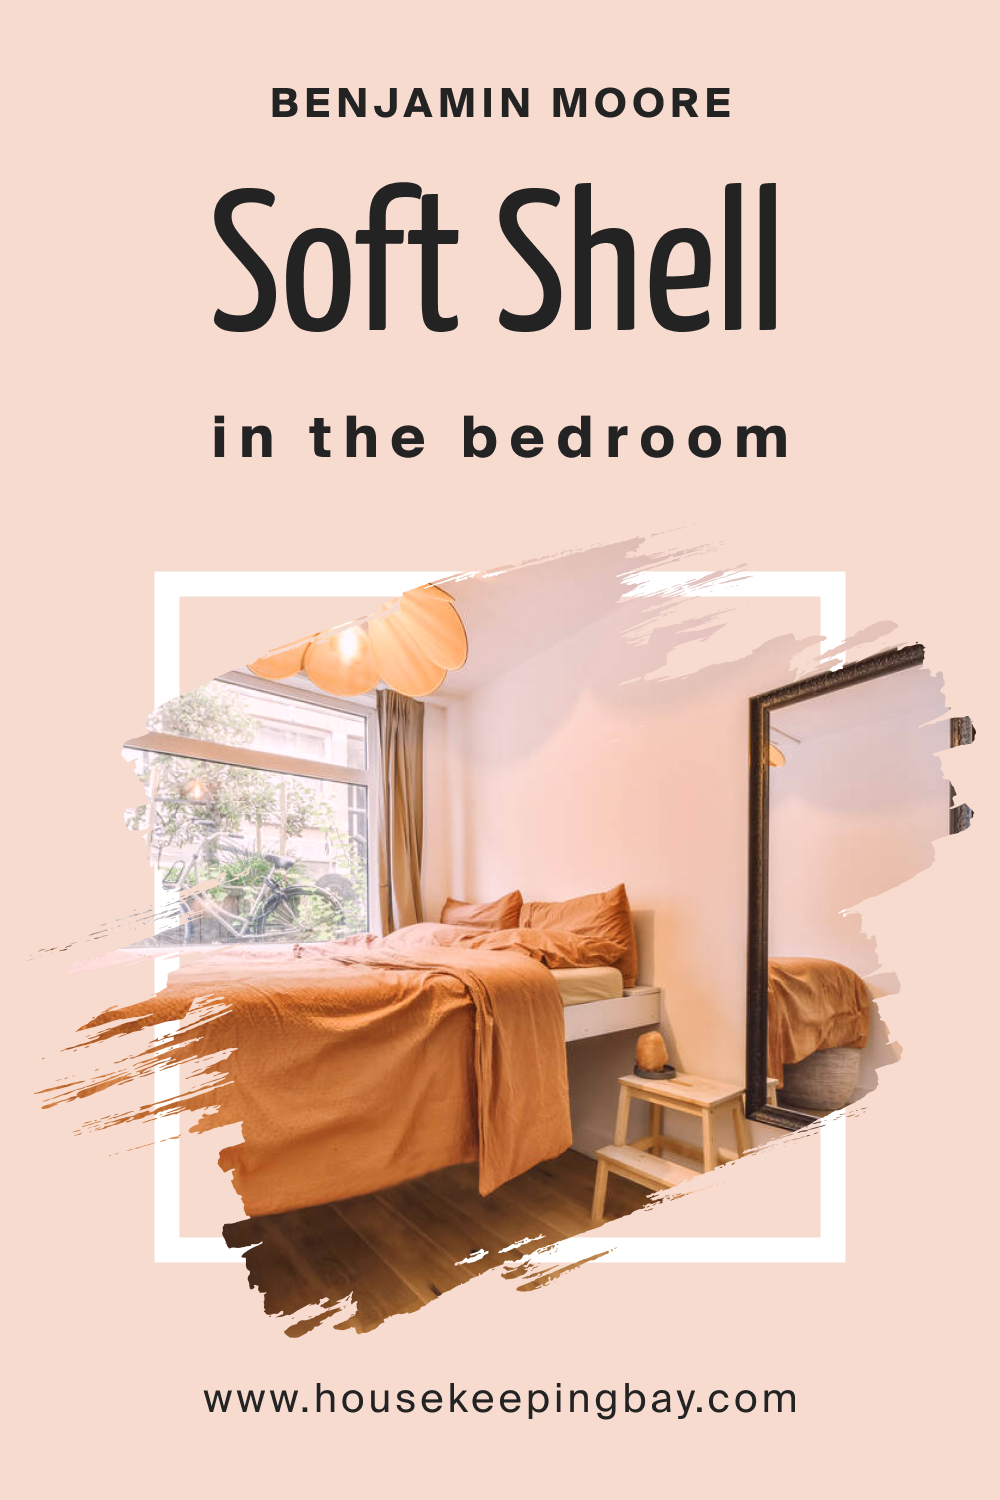 Benjamin Moore. Soft Shell 015 for the Bedroom